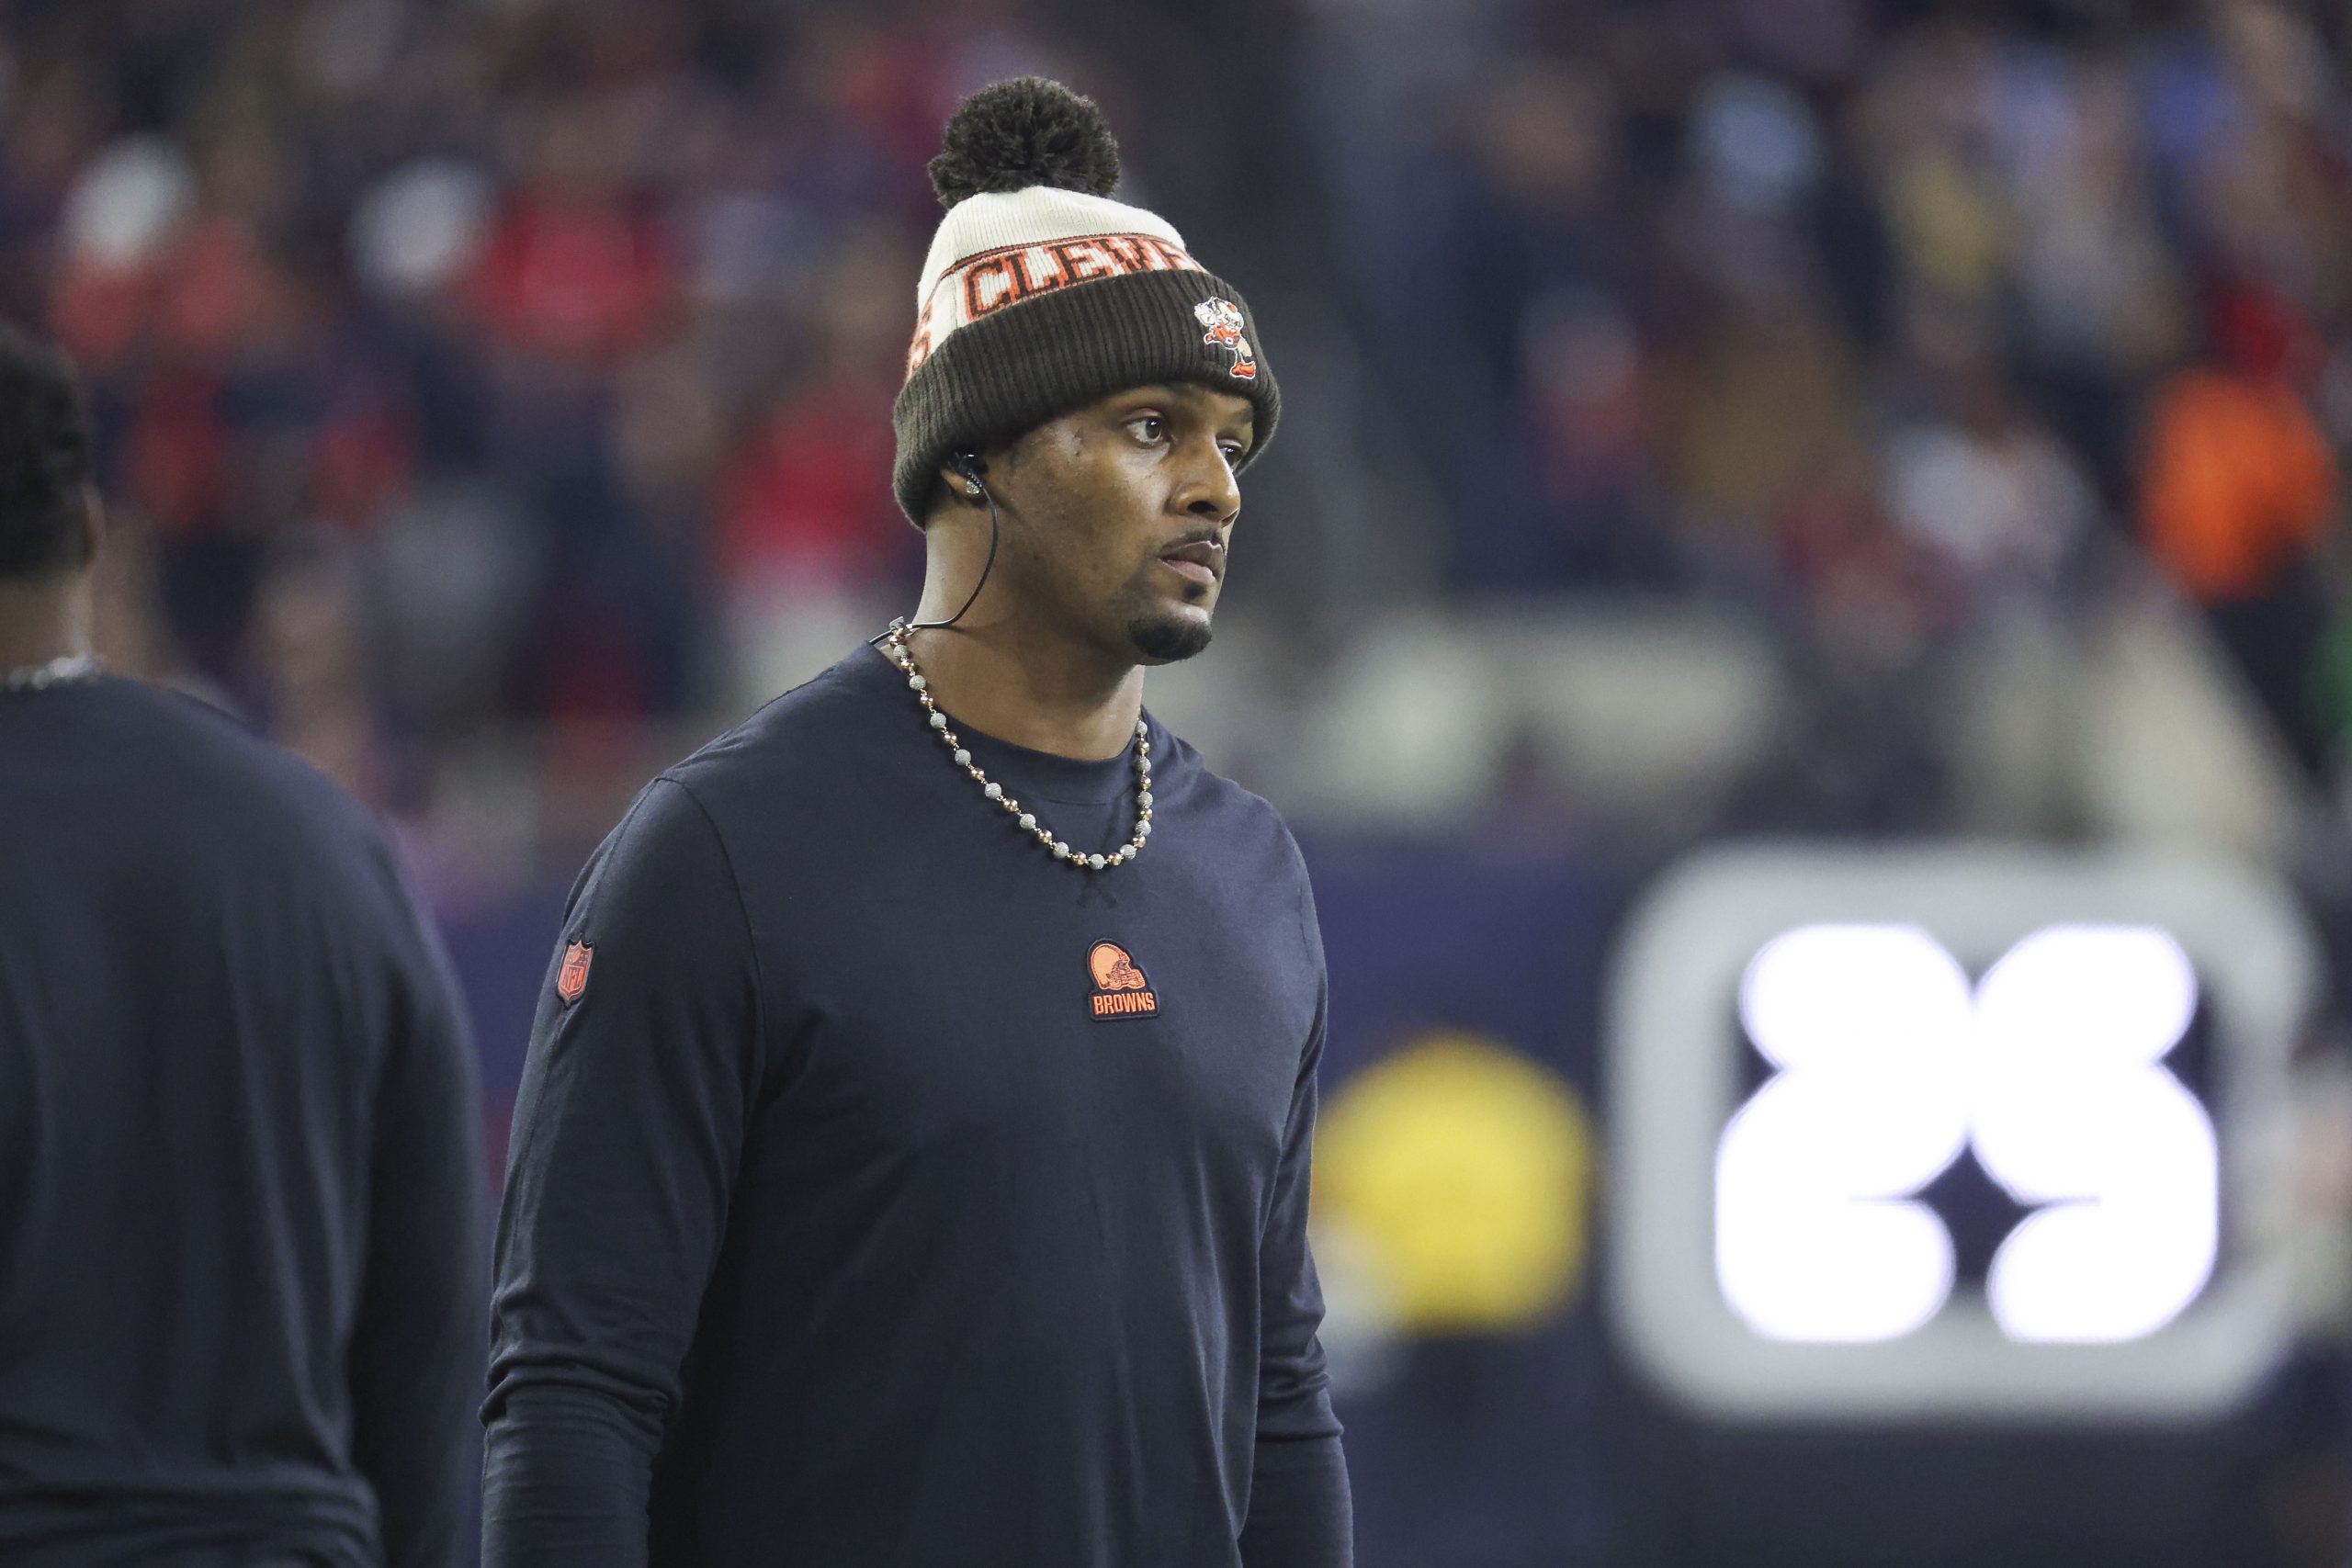 Deshaun Watson claims it’s been ‘tough’ to ‘block out the bull****’